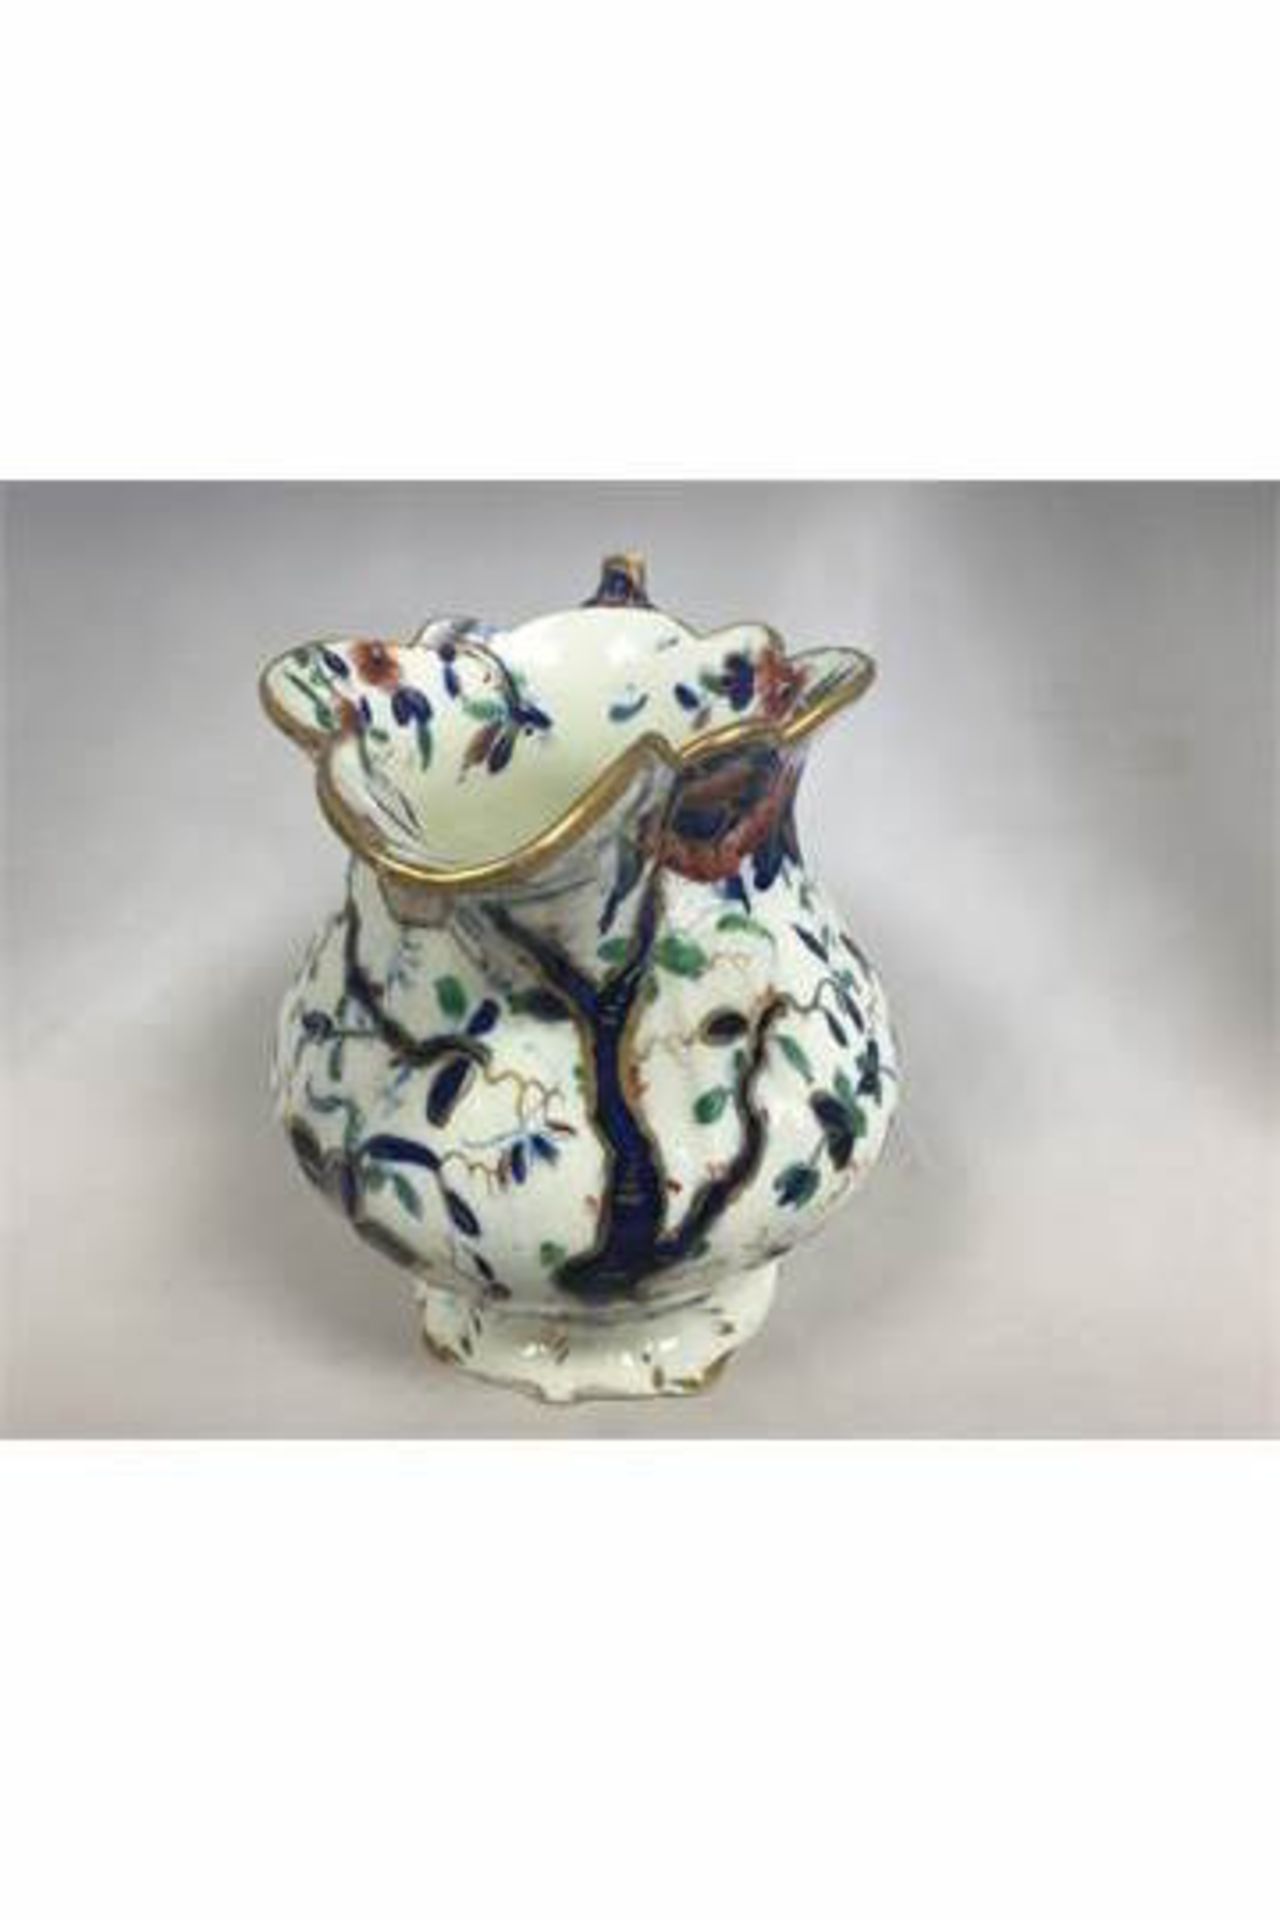 A 19TH CENTURY STAFFORDSHIRE IMARI JUG. HANDPAINTED WITH GILT EDGING. FREE UK DELIVERY. - Image 3 of 5